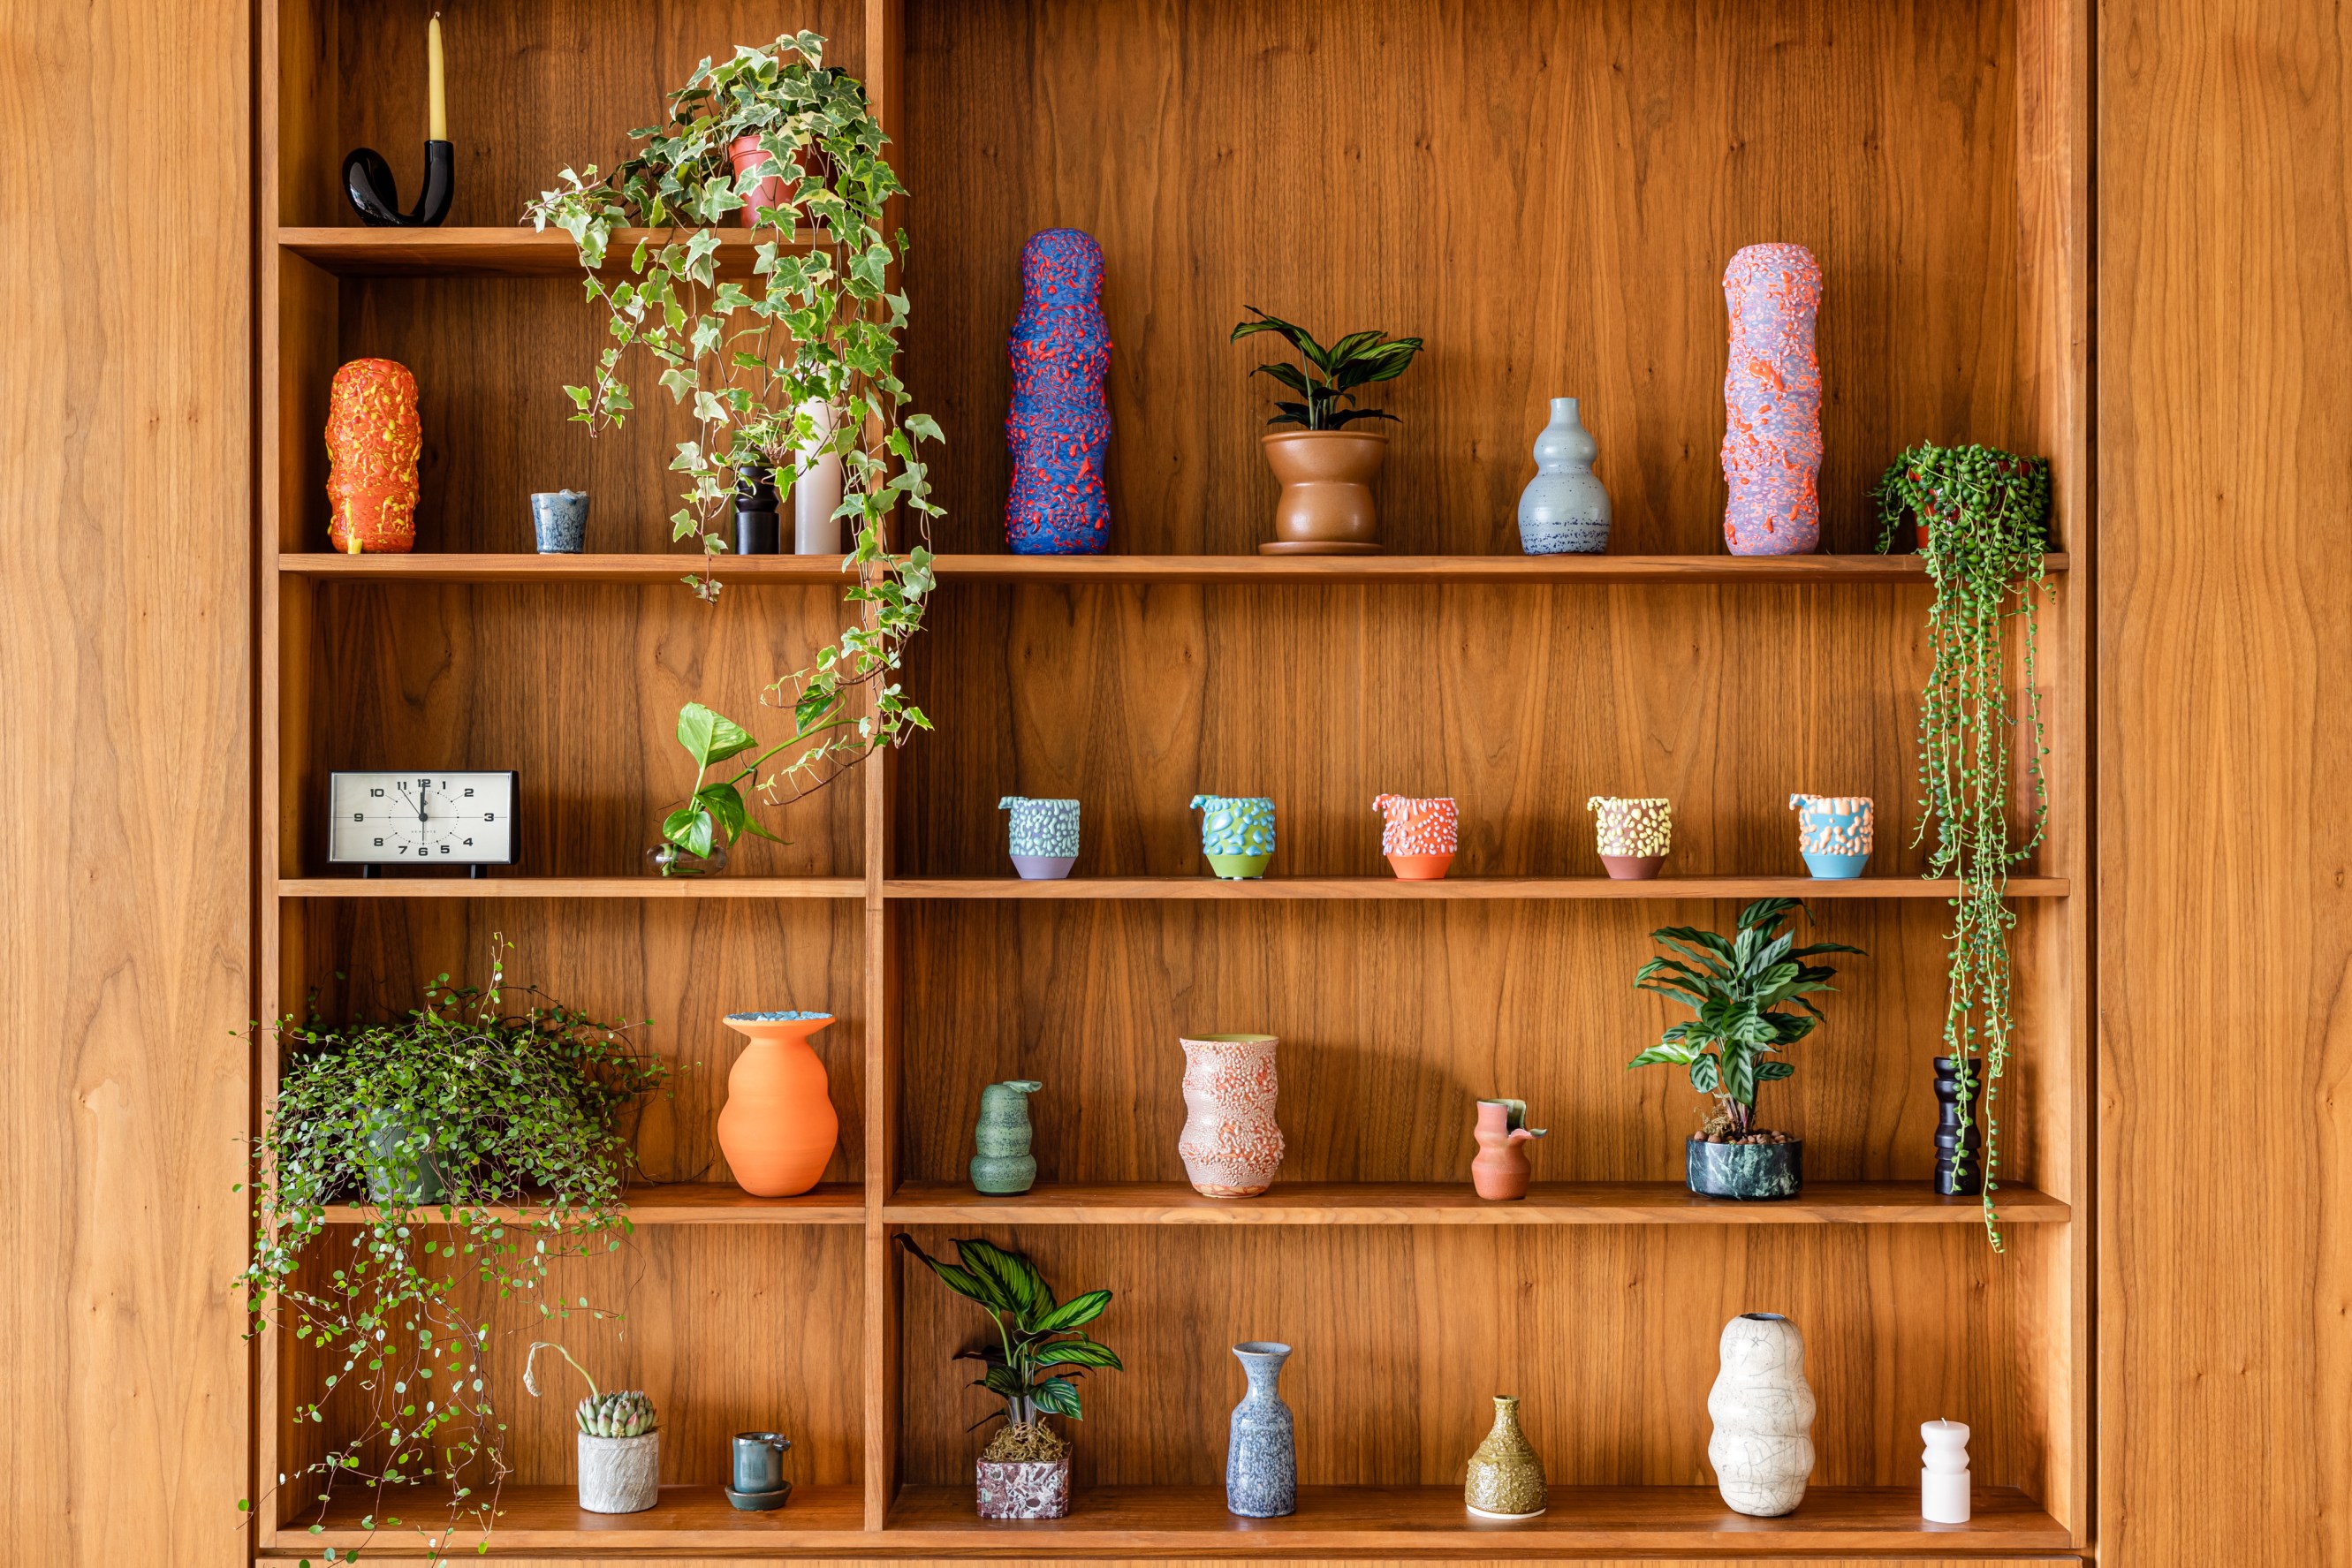 Close-up shot of the pottery wall, which includes a variety of vases of different colors and textures.